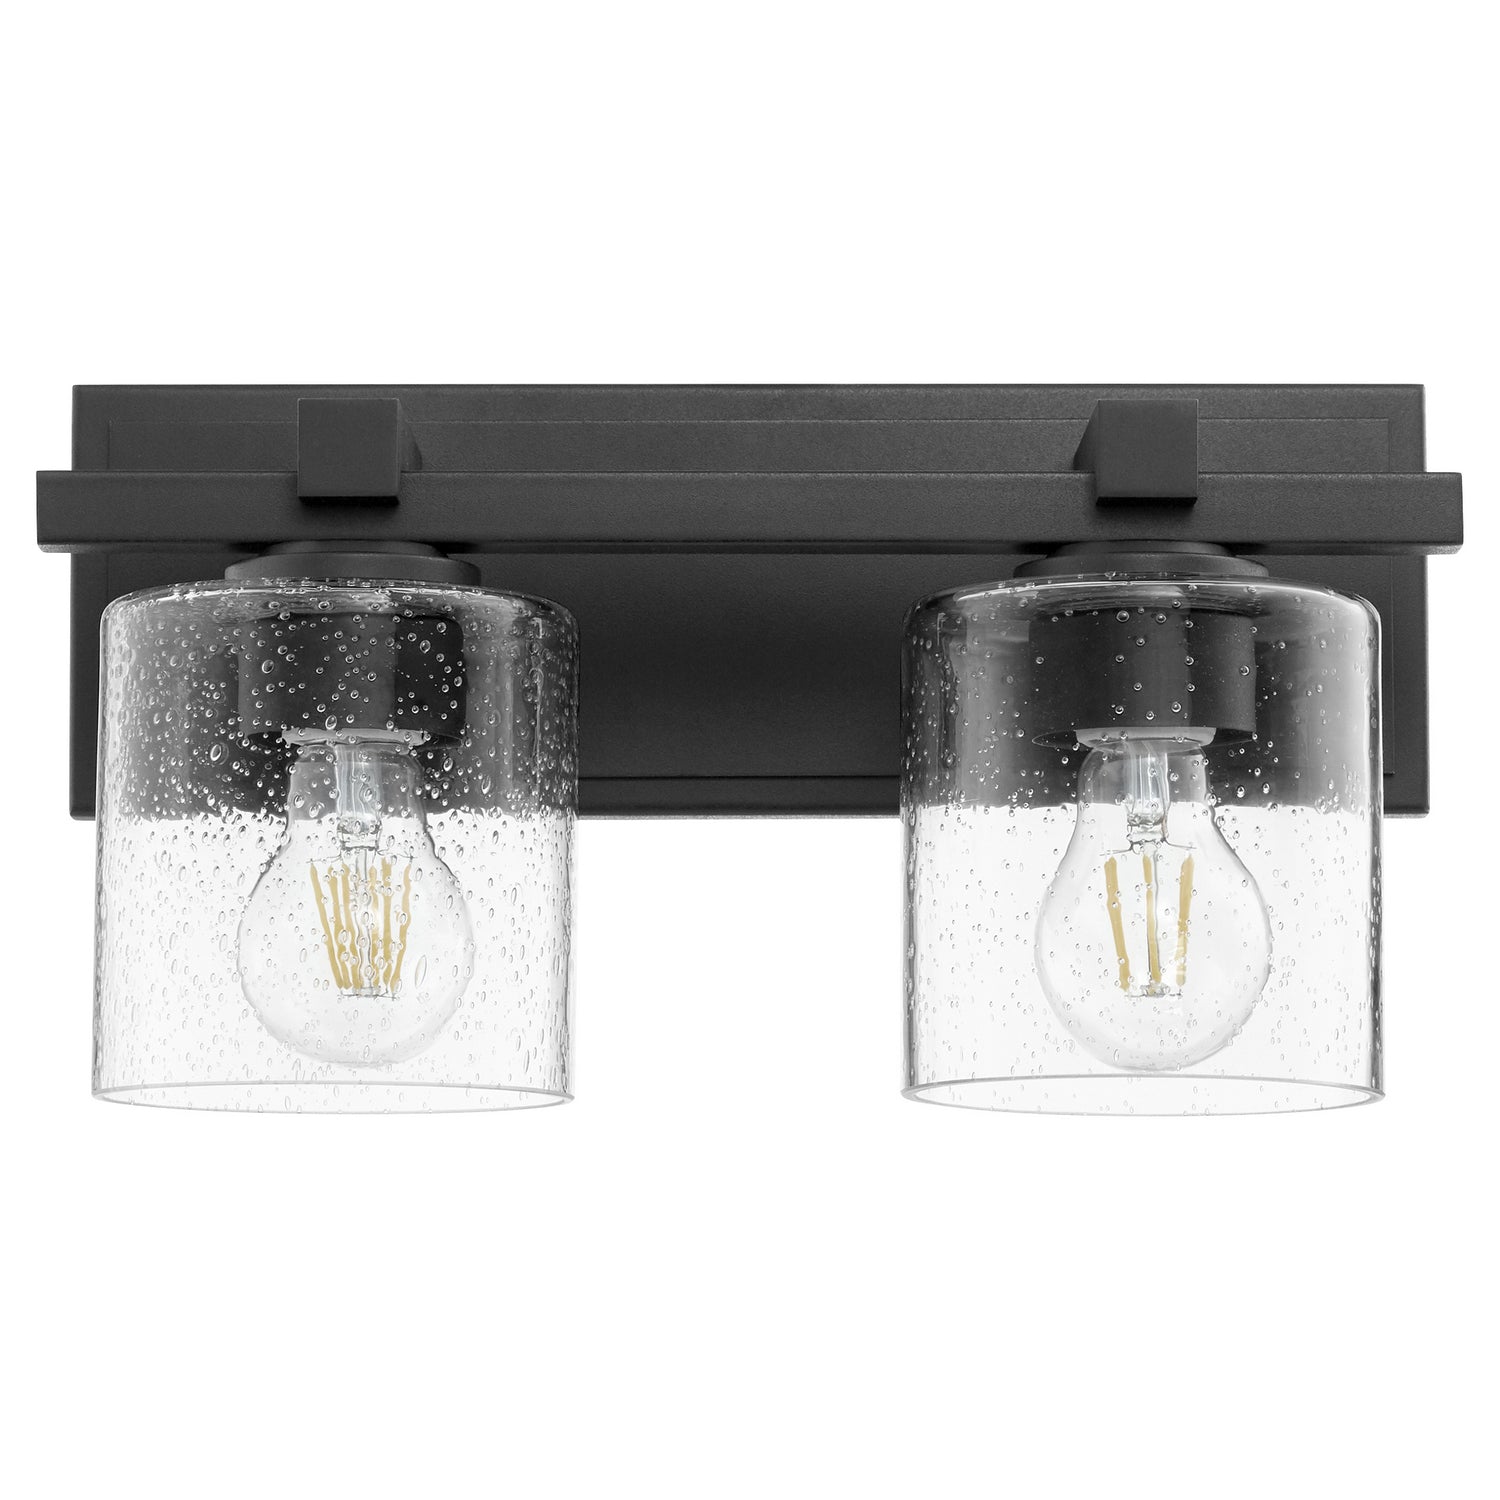 Quorum - 5669-2-269 - Two Light Wall Mount - 5669 Cylinder Lighting Series - Textured Black w/ Clear/Seeded